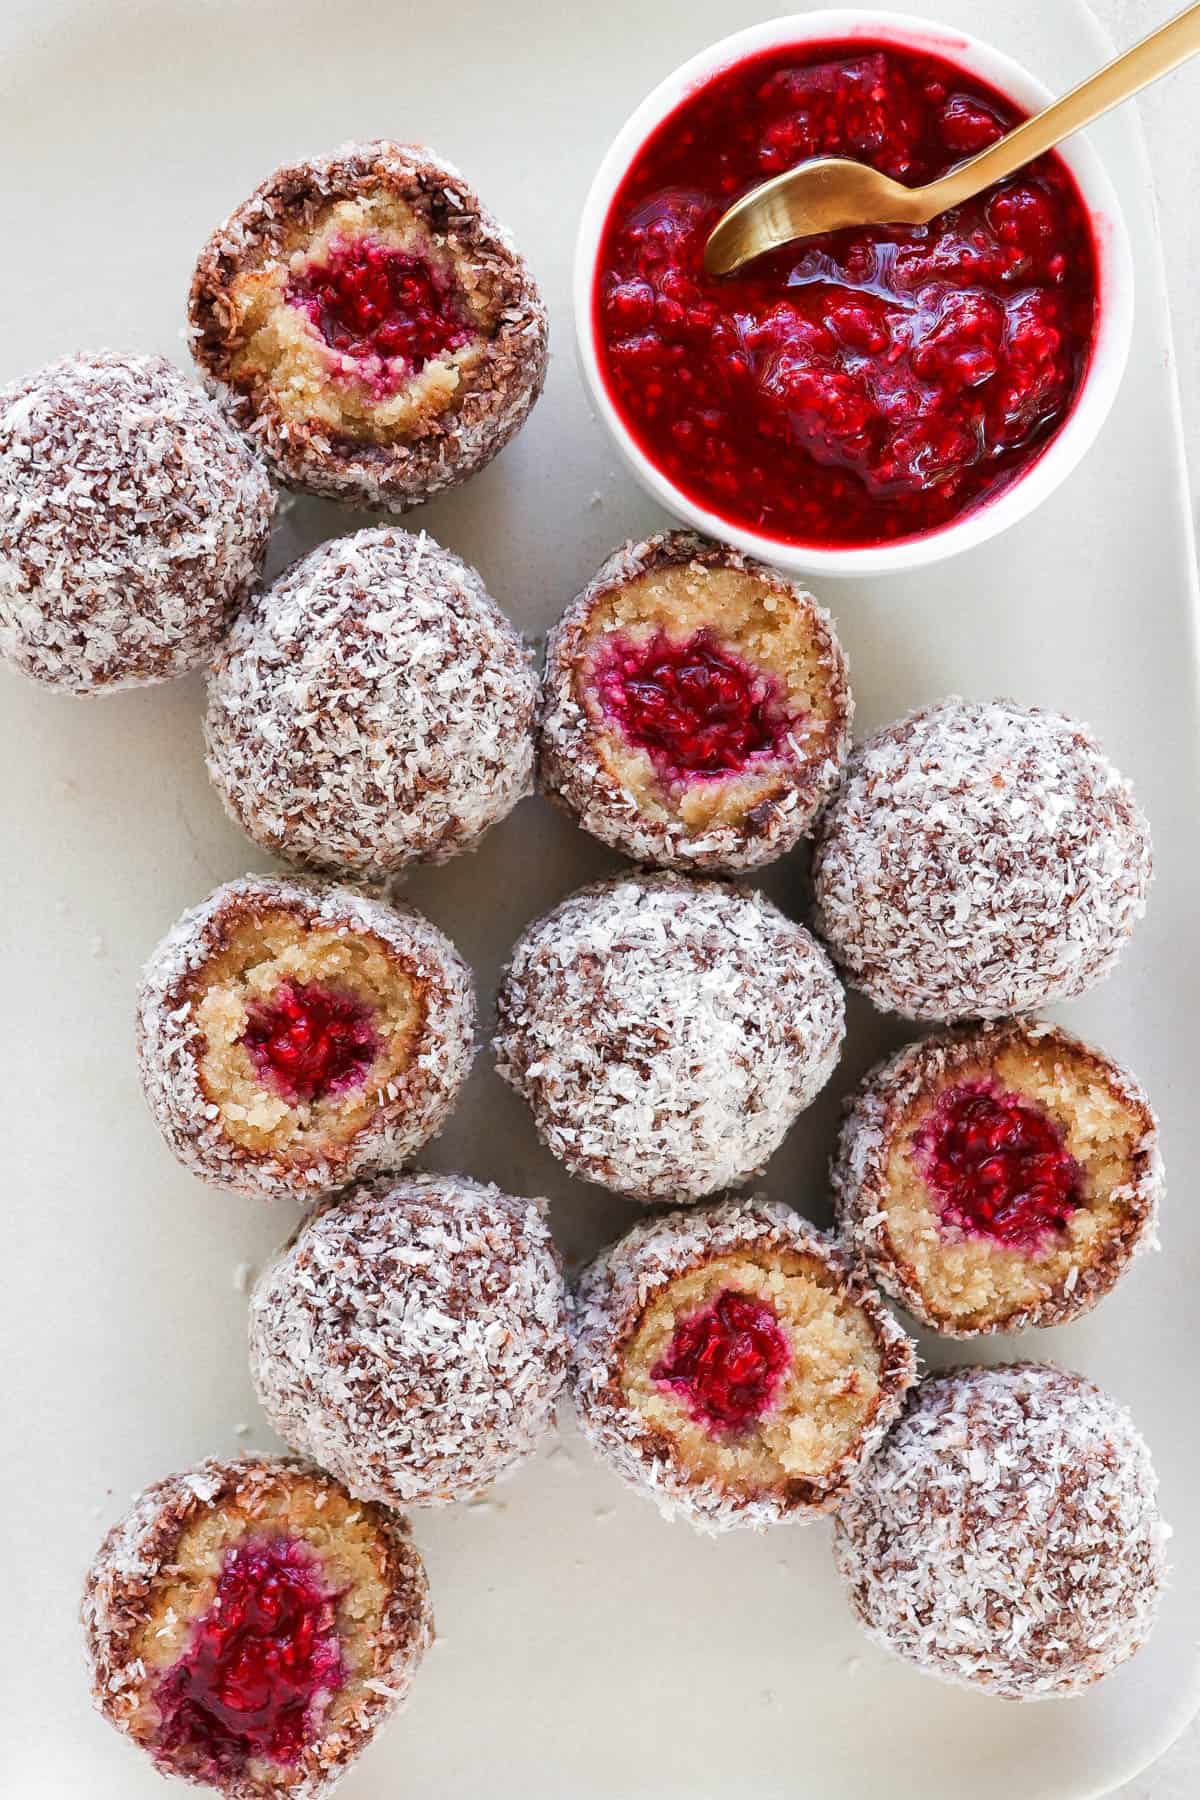 Plate of Lamington balls cut in half. Mashed raspberries on side with gold spoon for decoration.